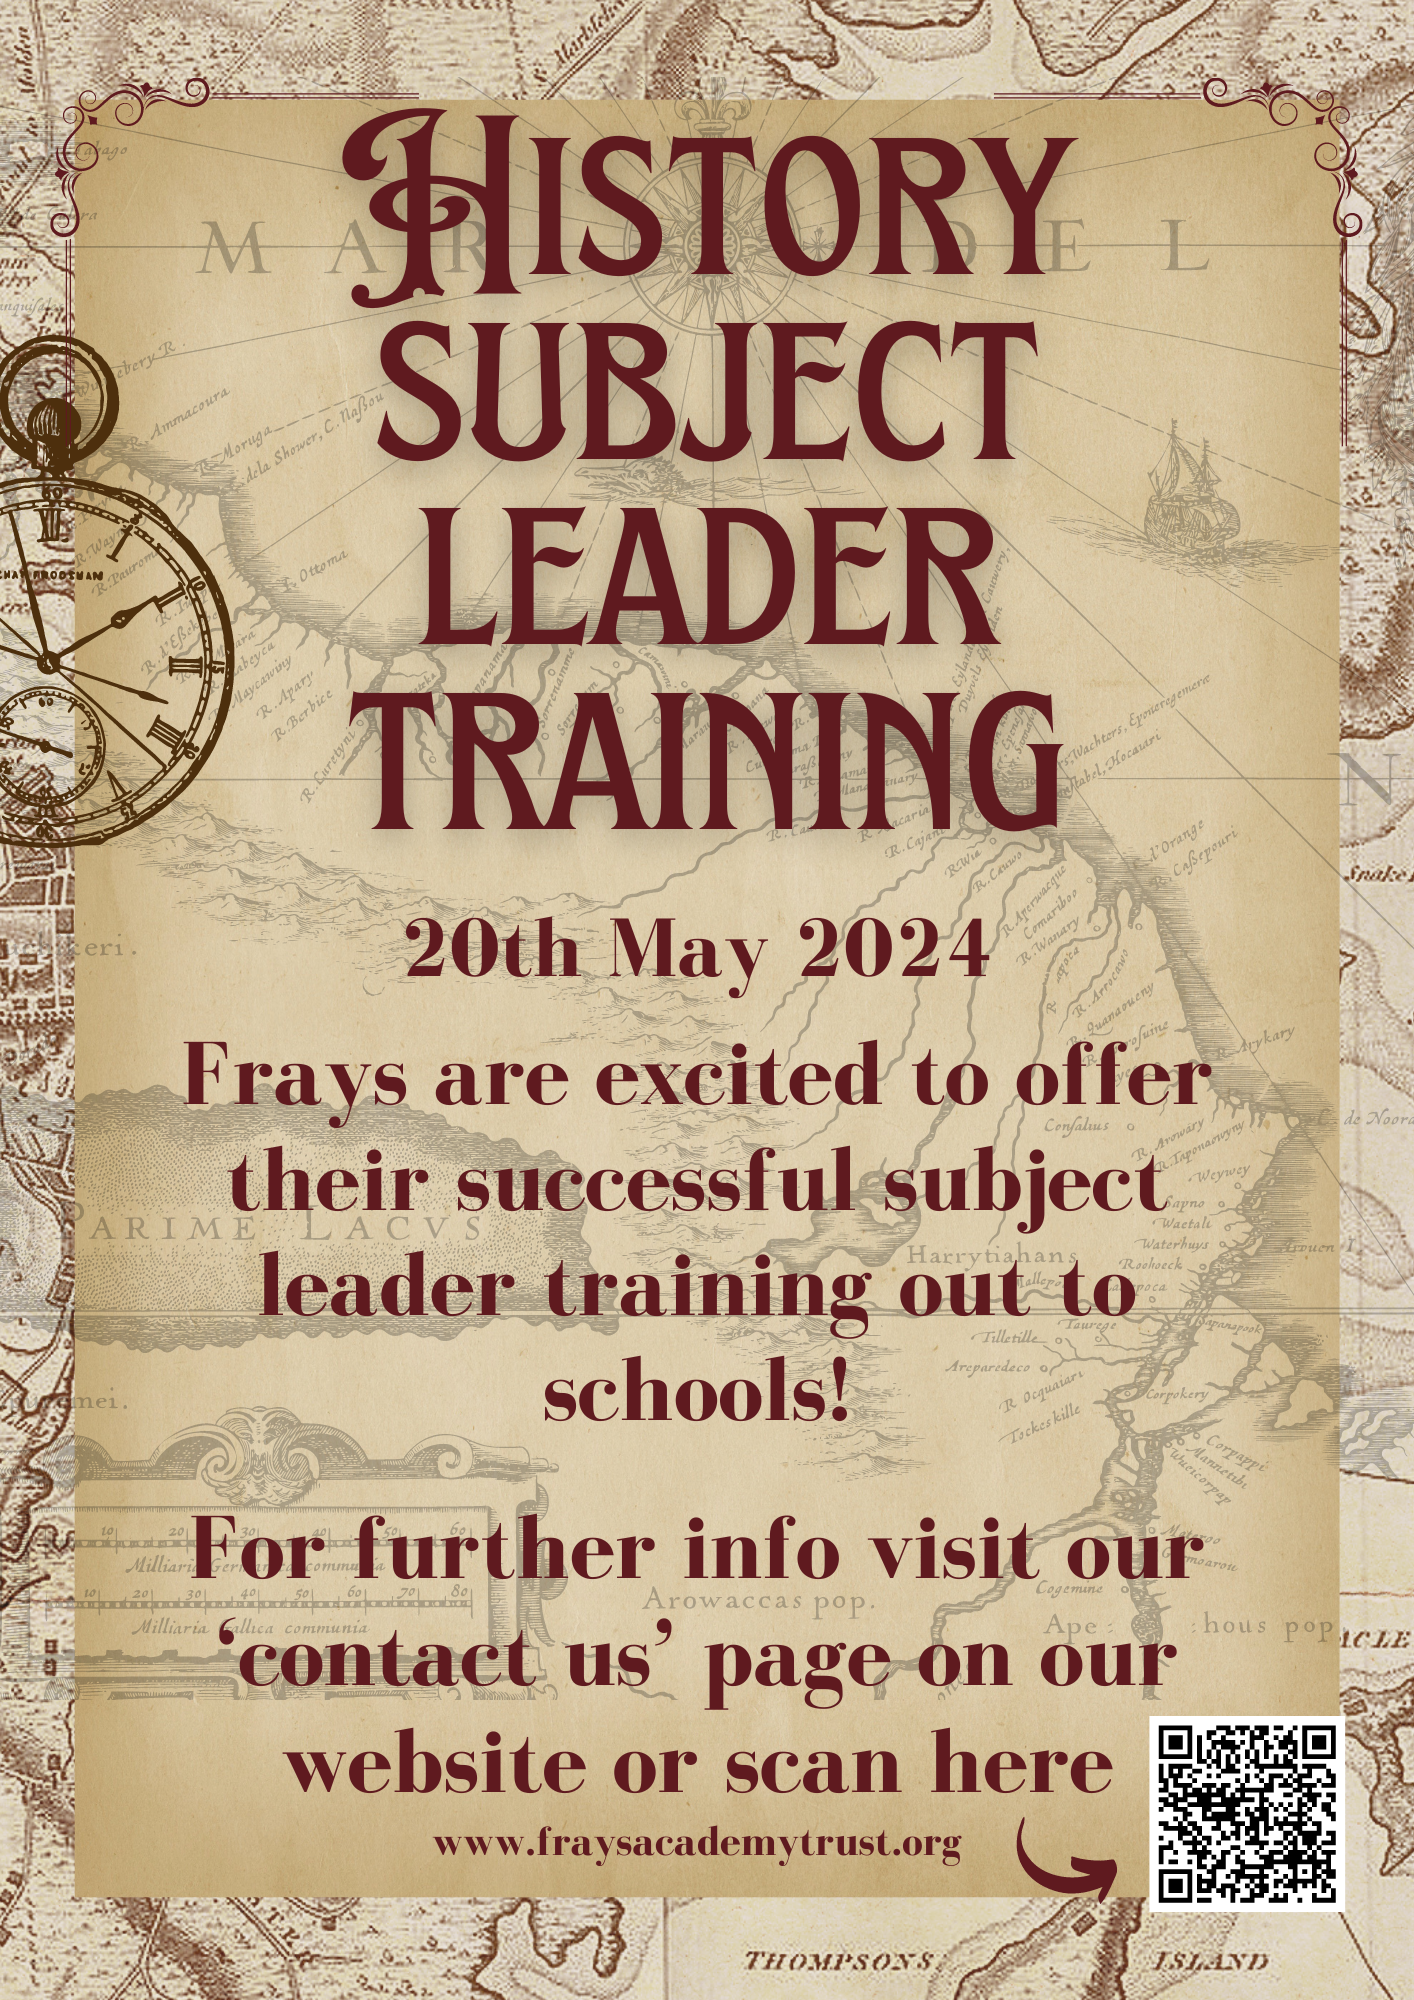 History subject leader training offer from Frays